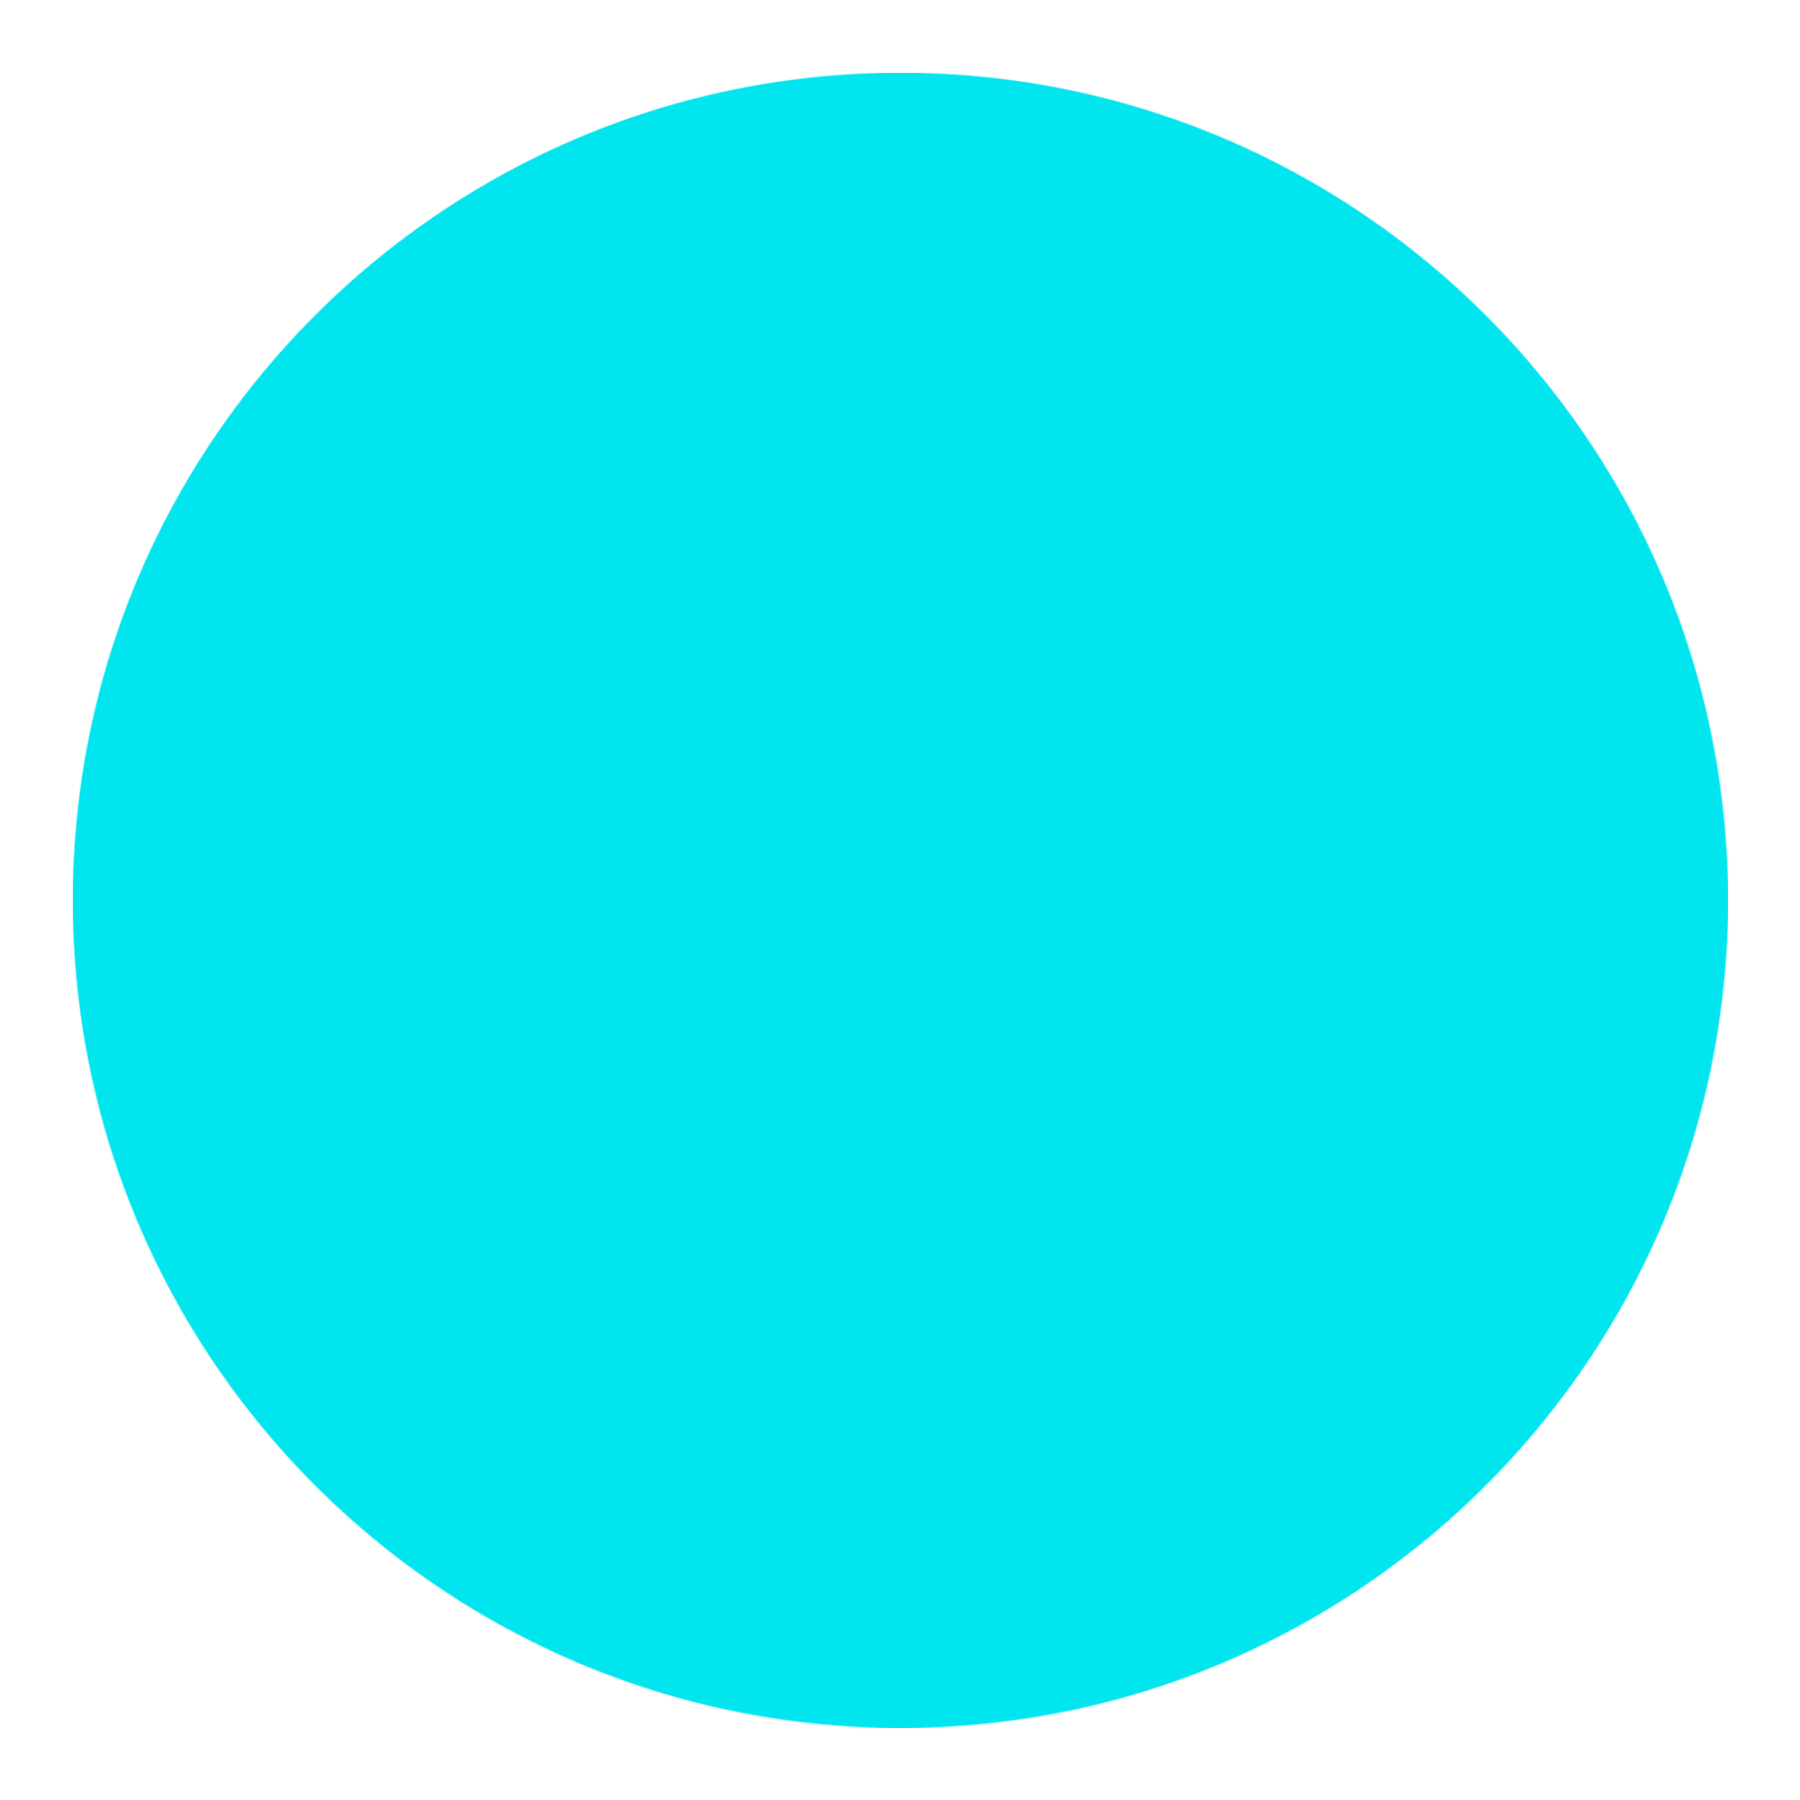 attribute-color-00E5EE-turquoise-blue